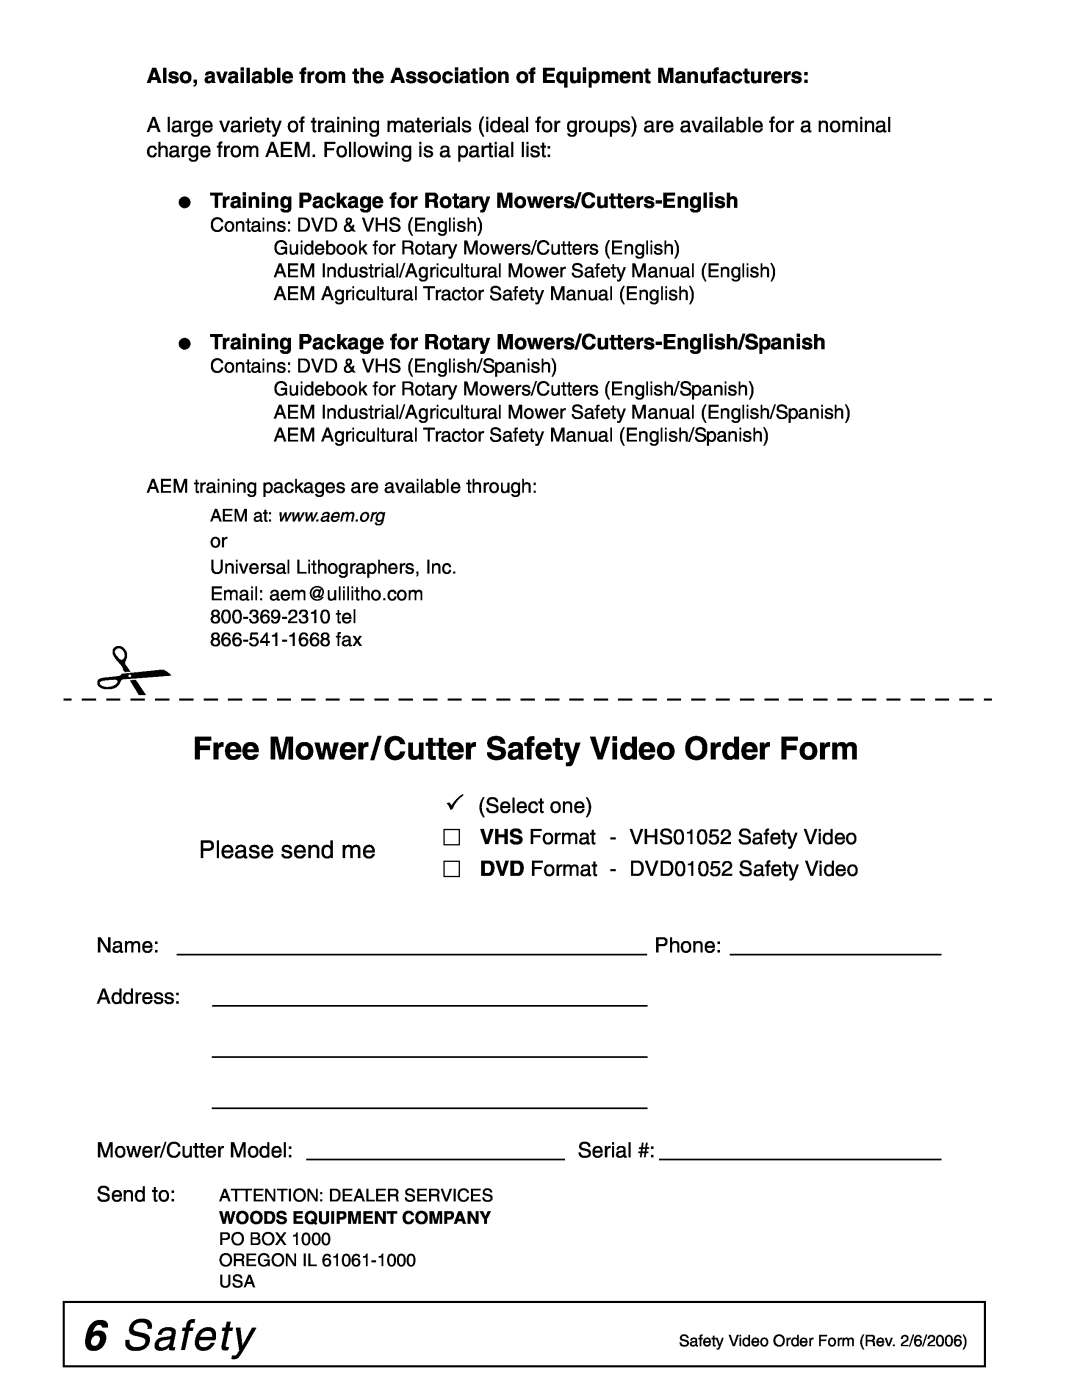 Woods Equipment HC72, HC54, HC48, HC60 manual 6Safety, Free Mower/Cutter Safety Video Order Form, Please send me 